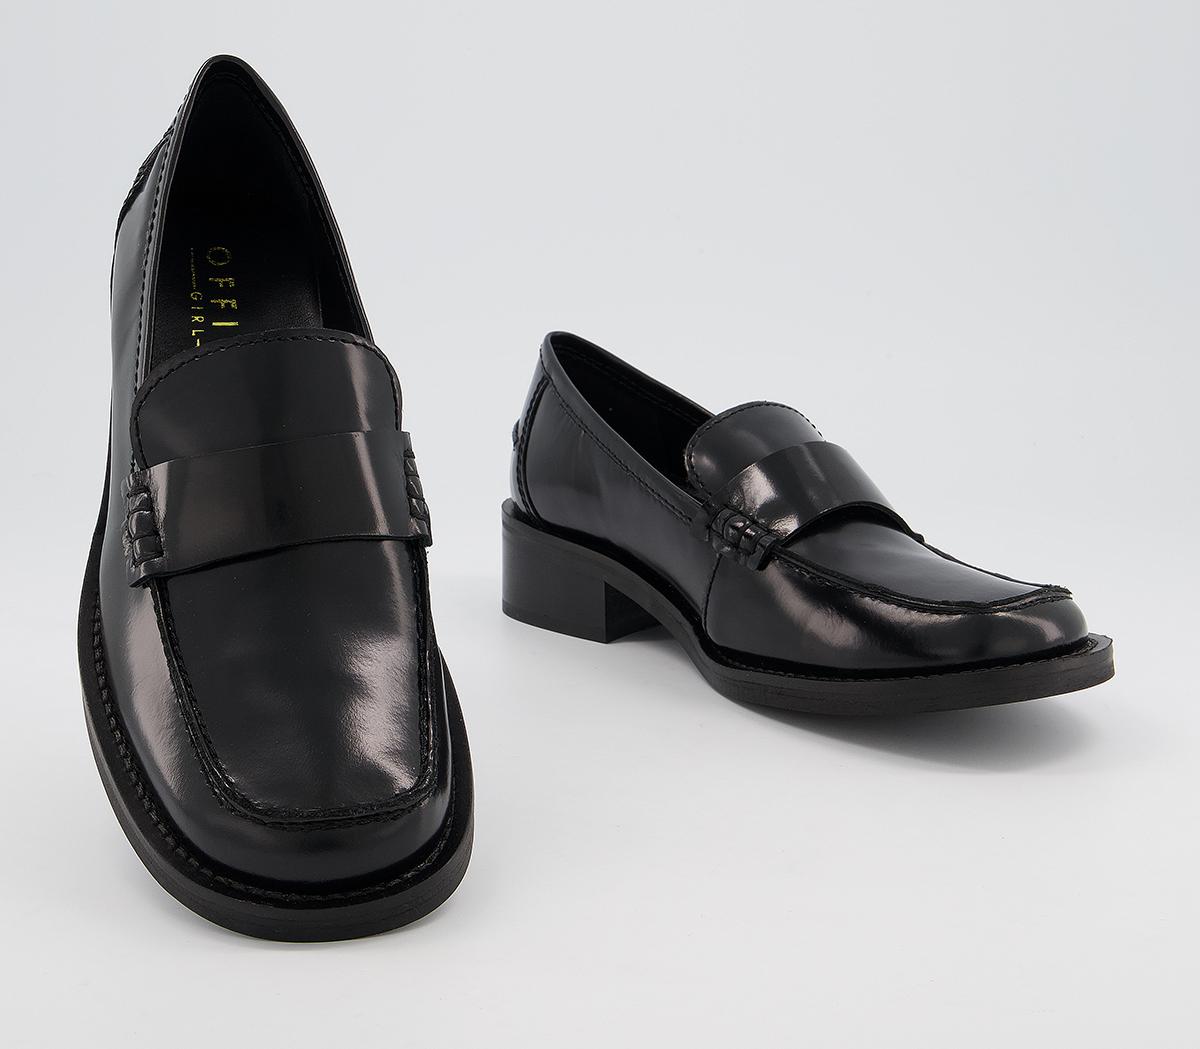 OFFICE Featuring Loafers Black Leather - Flat Shoes for Women